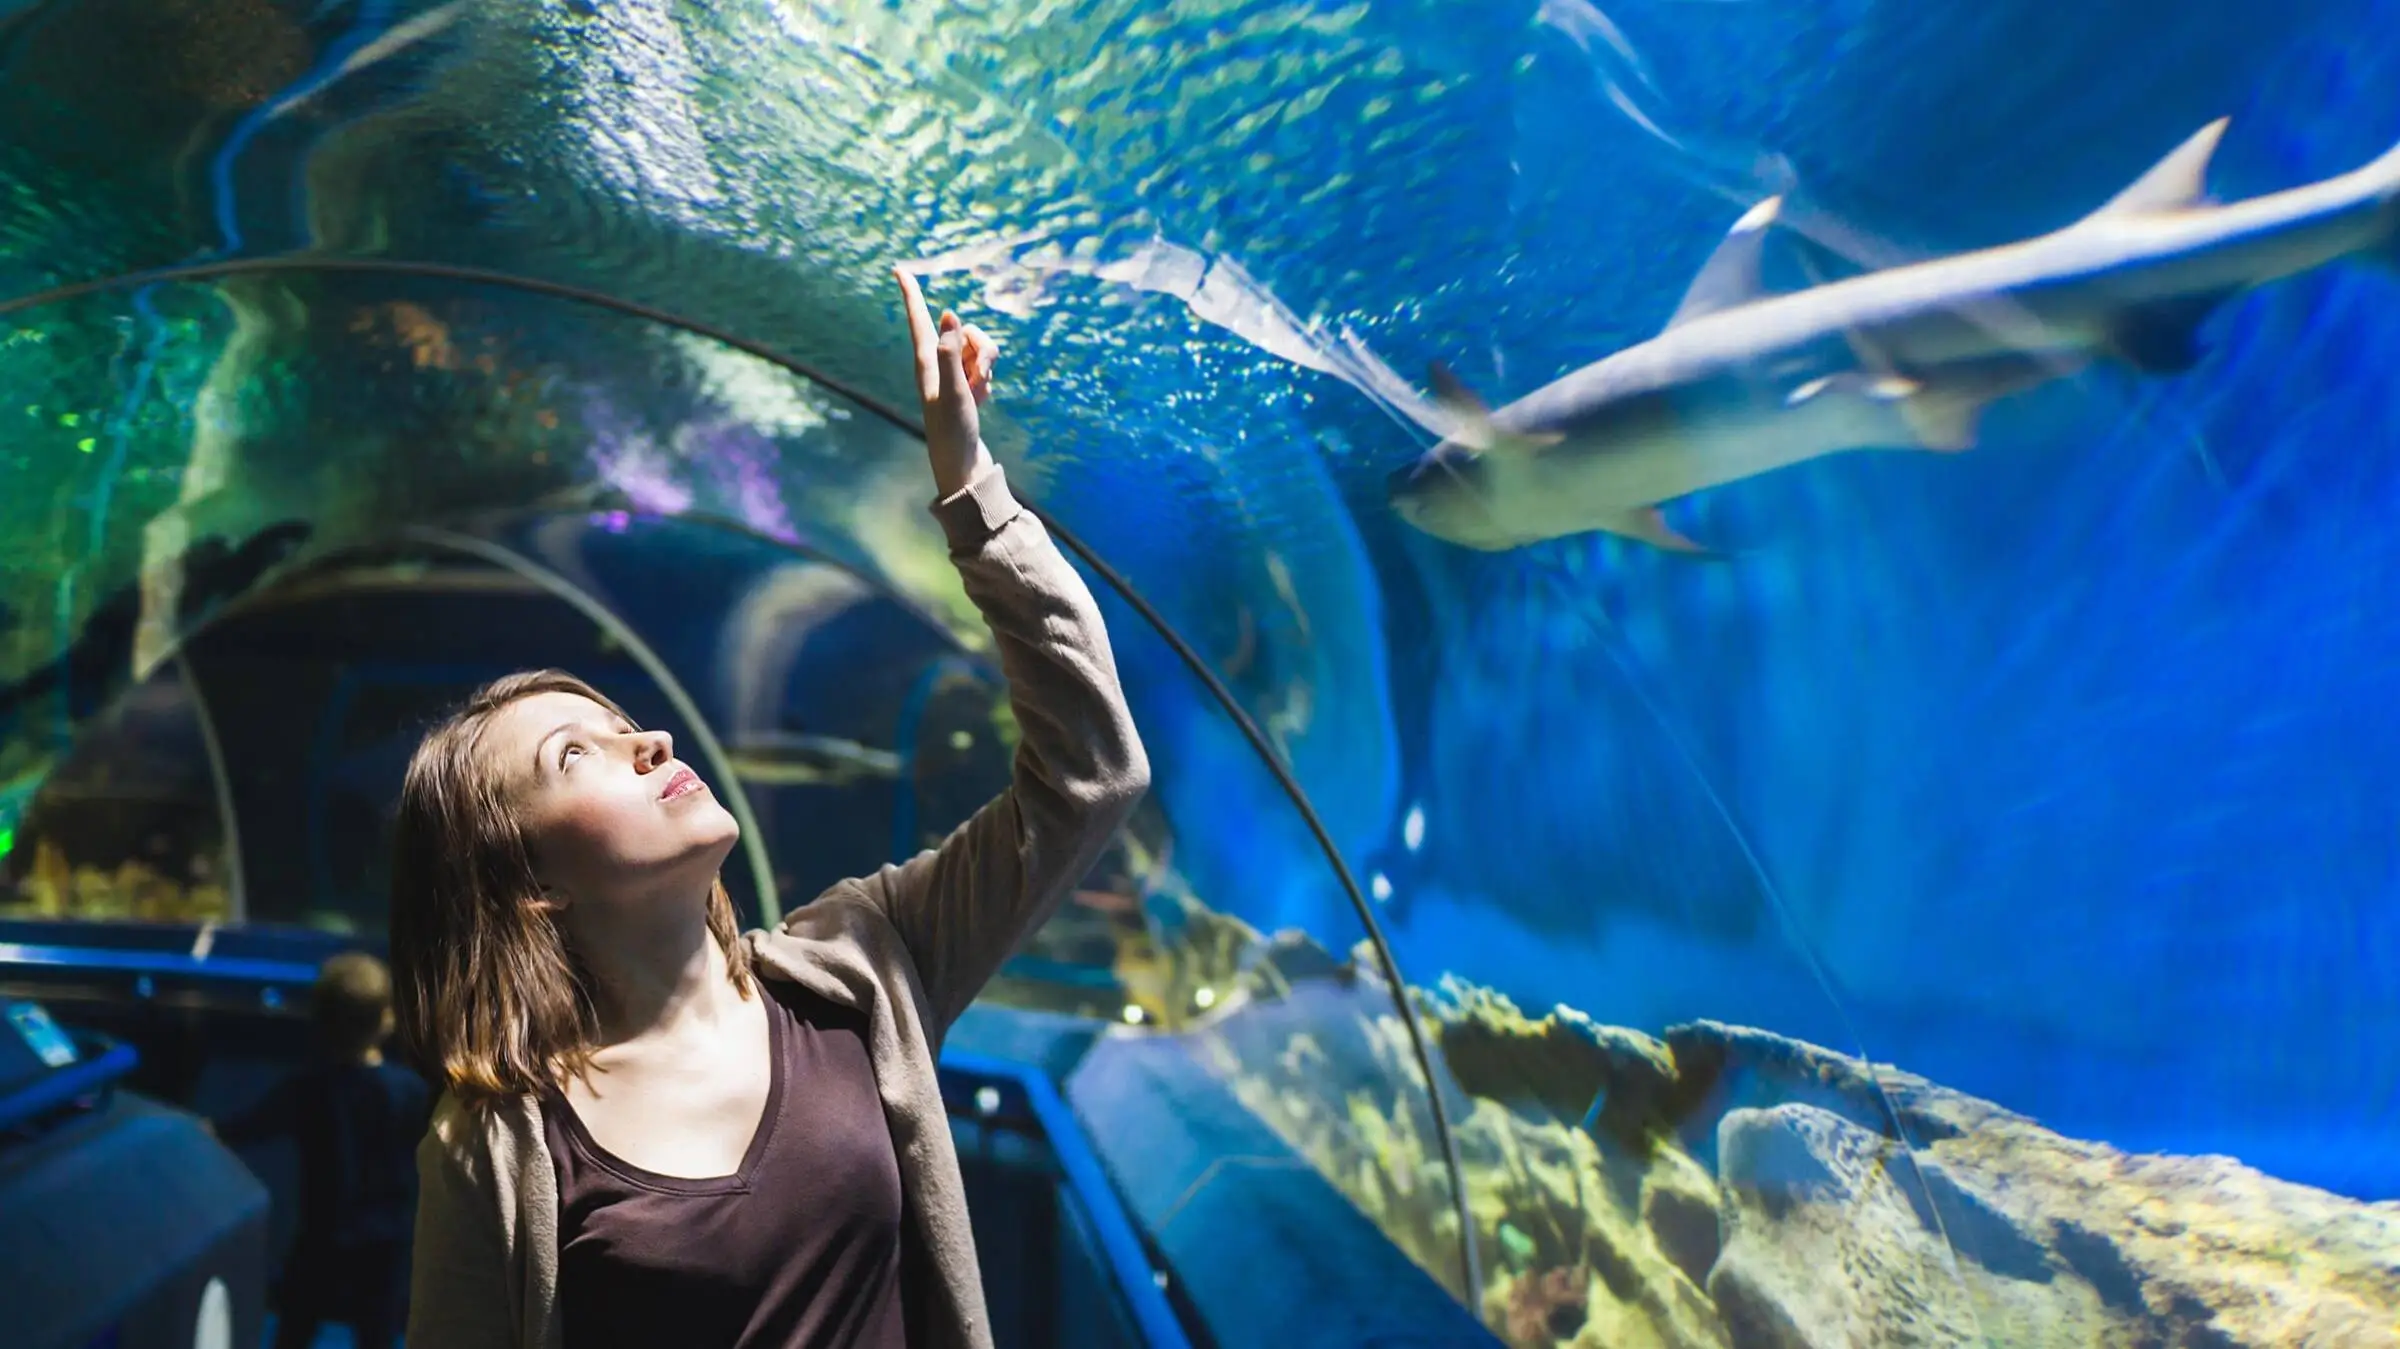 Woman standing under an aquarium tube with a shark swimming above her